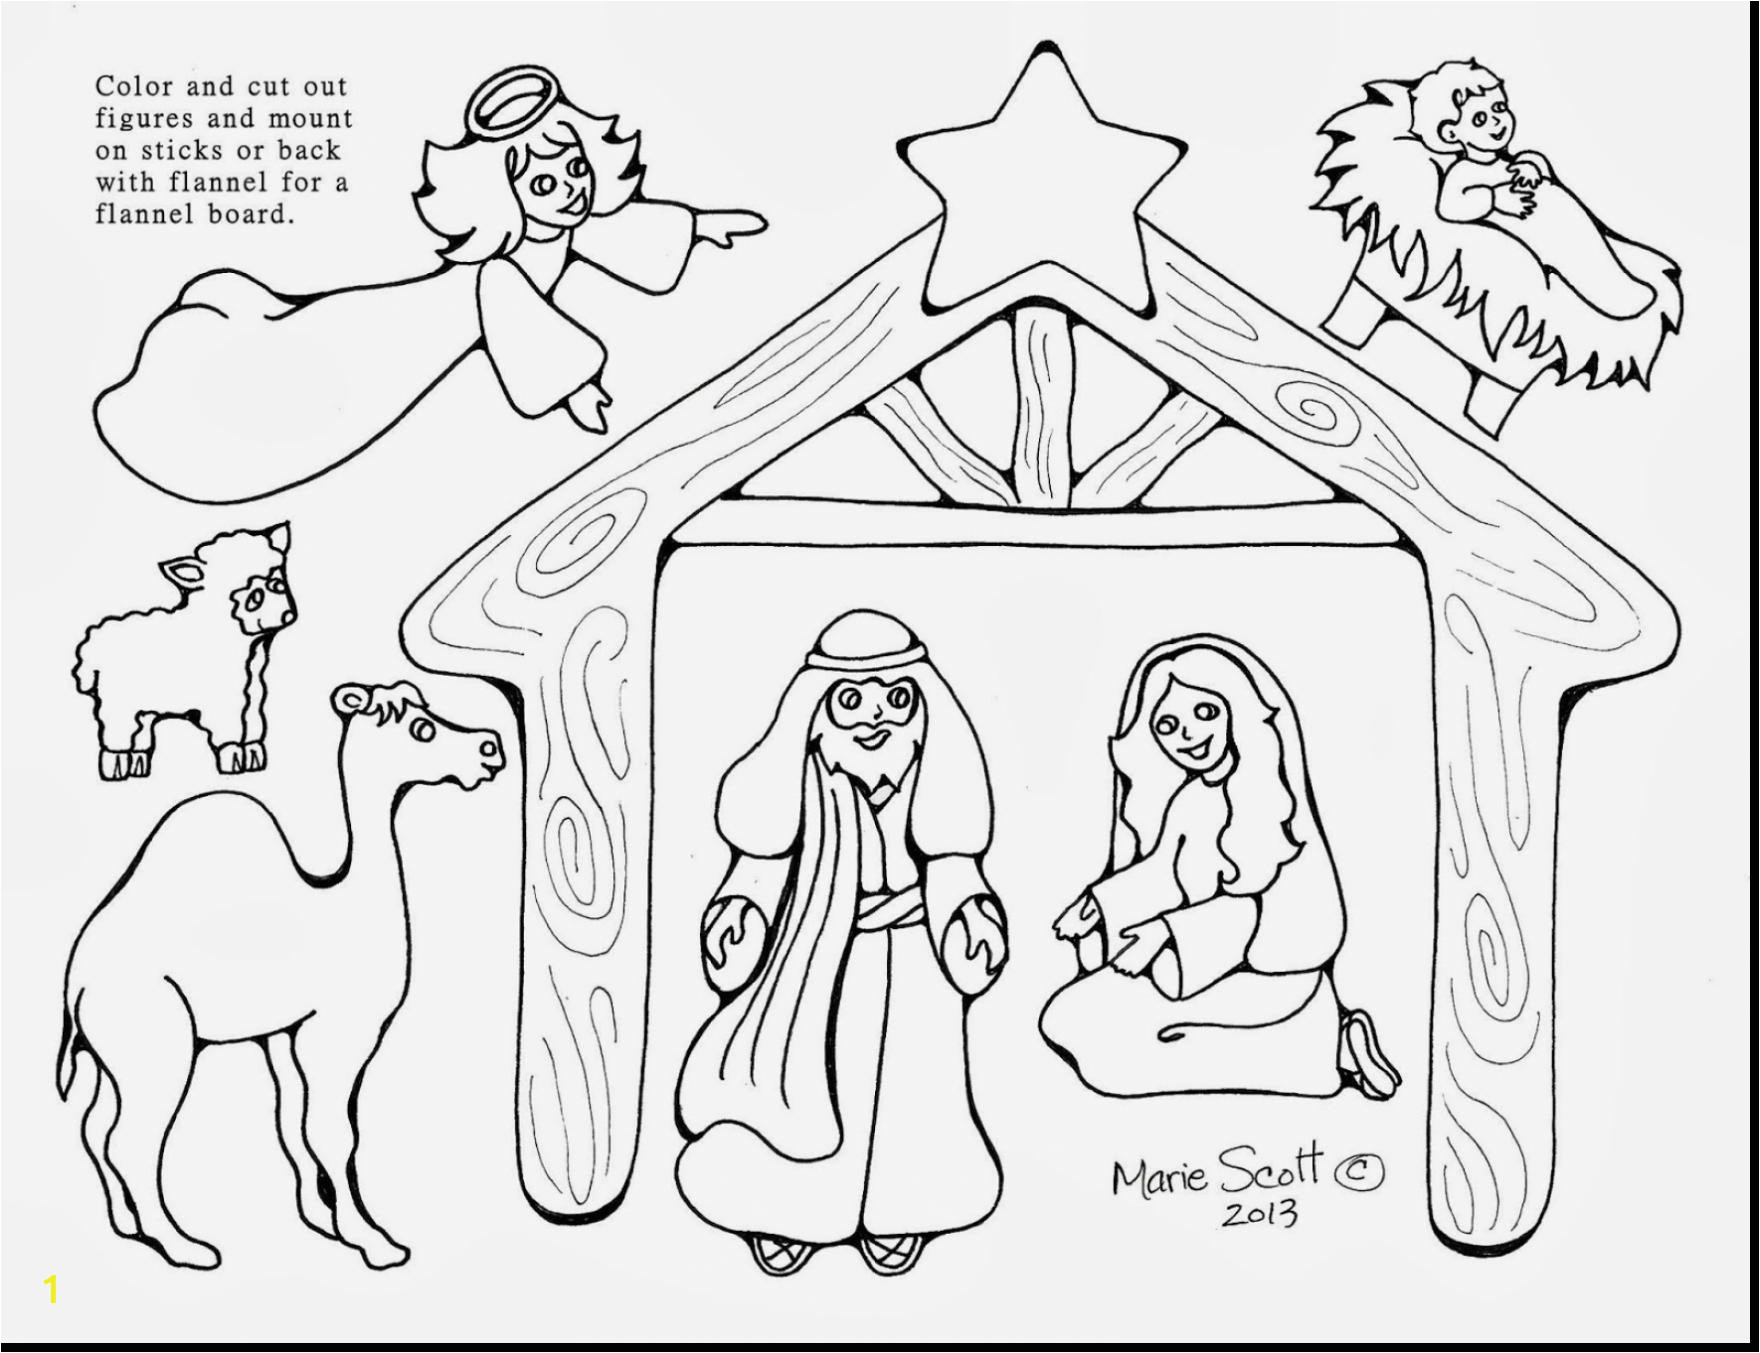 printable nativity scene coloring pages